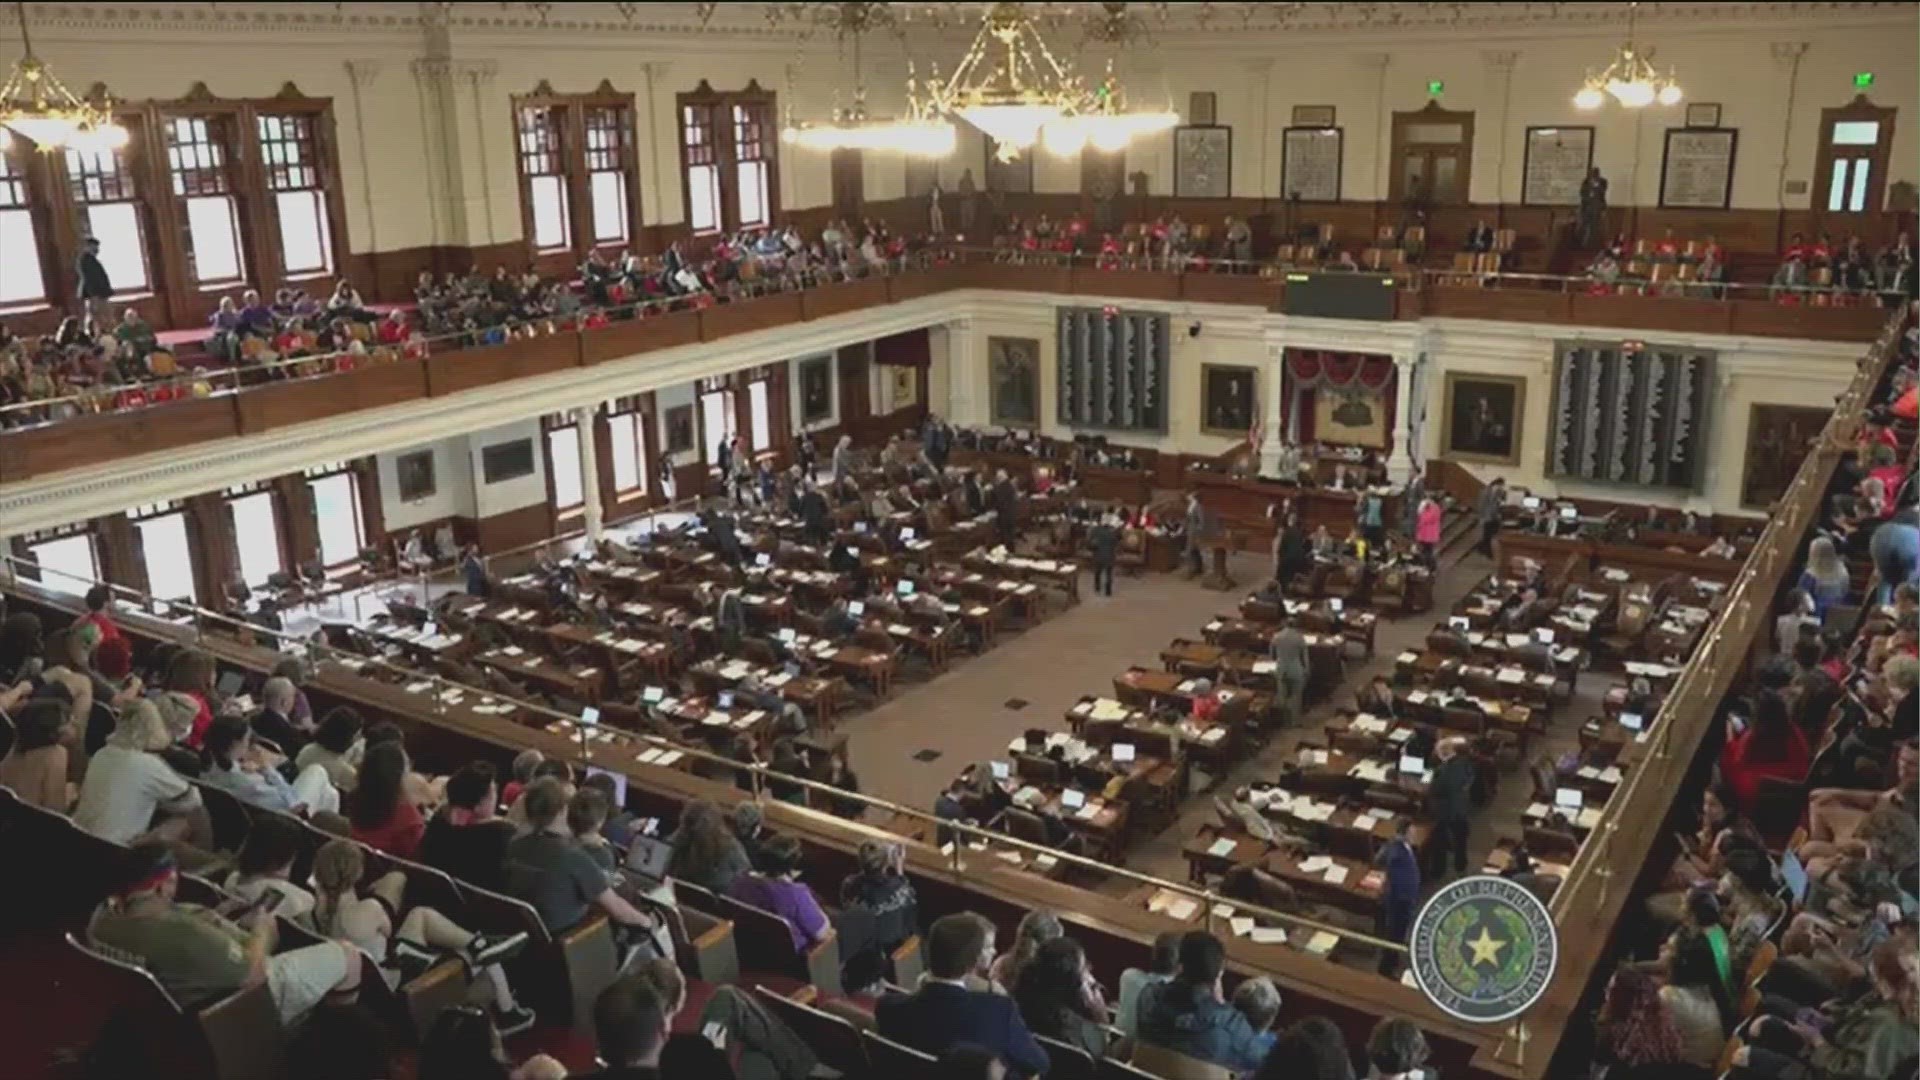 On Friday, lawmakers in the Texas House were debating Senate Bill 14, which would ban gender-affirming care for minors.